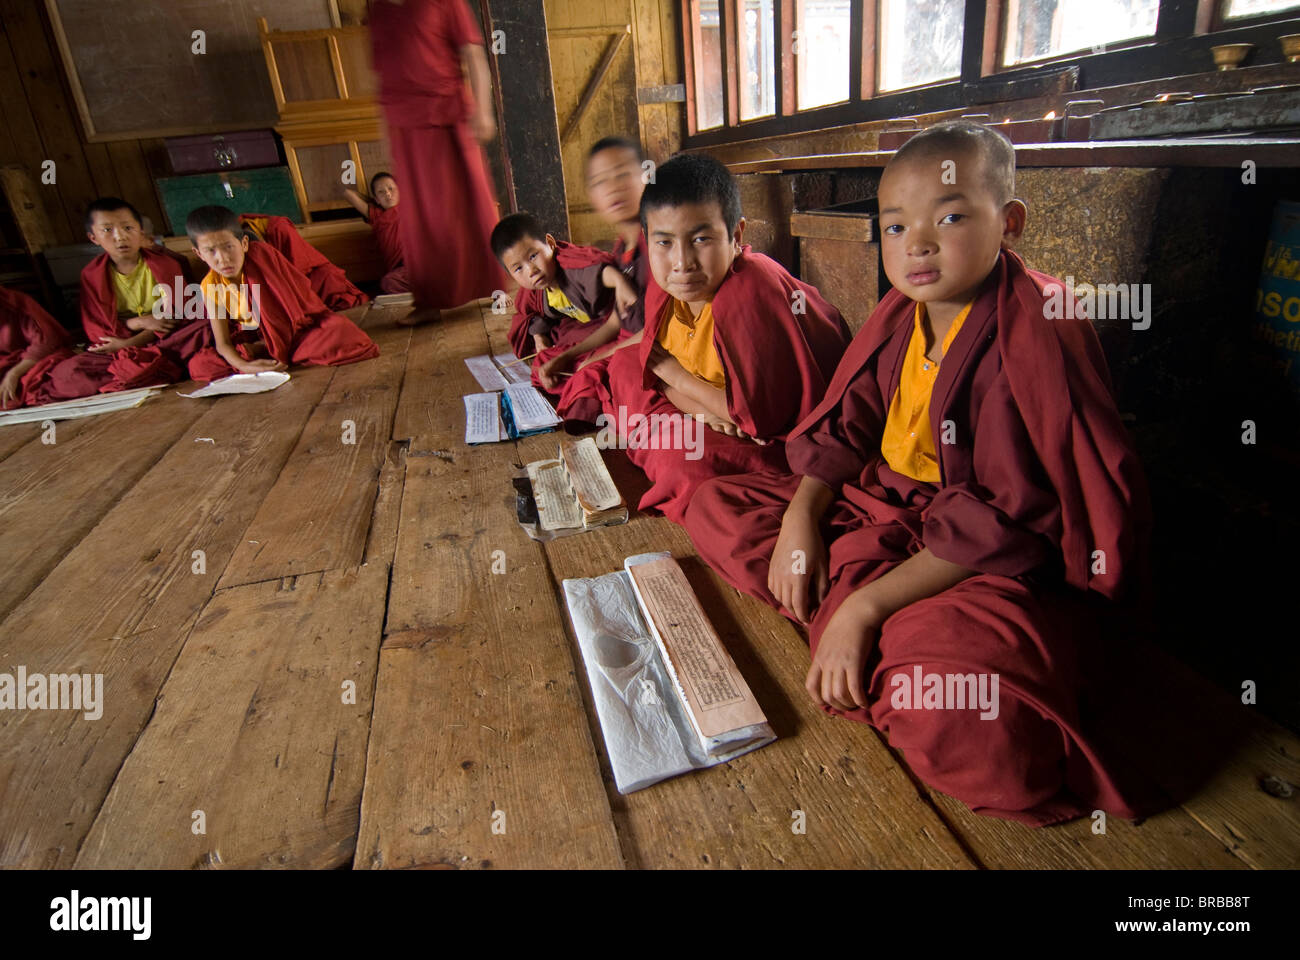 Group of young Buddhist monks learning, Chimi Lhakhang, Bhutan Stock Photo